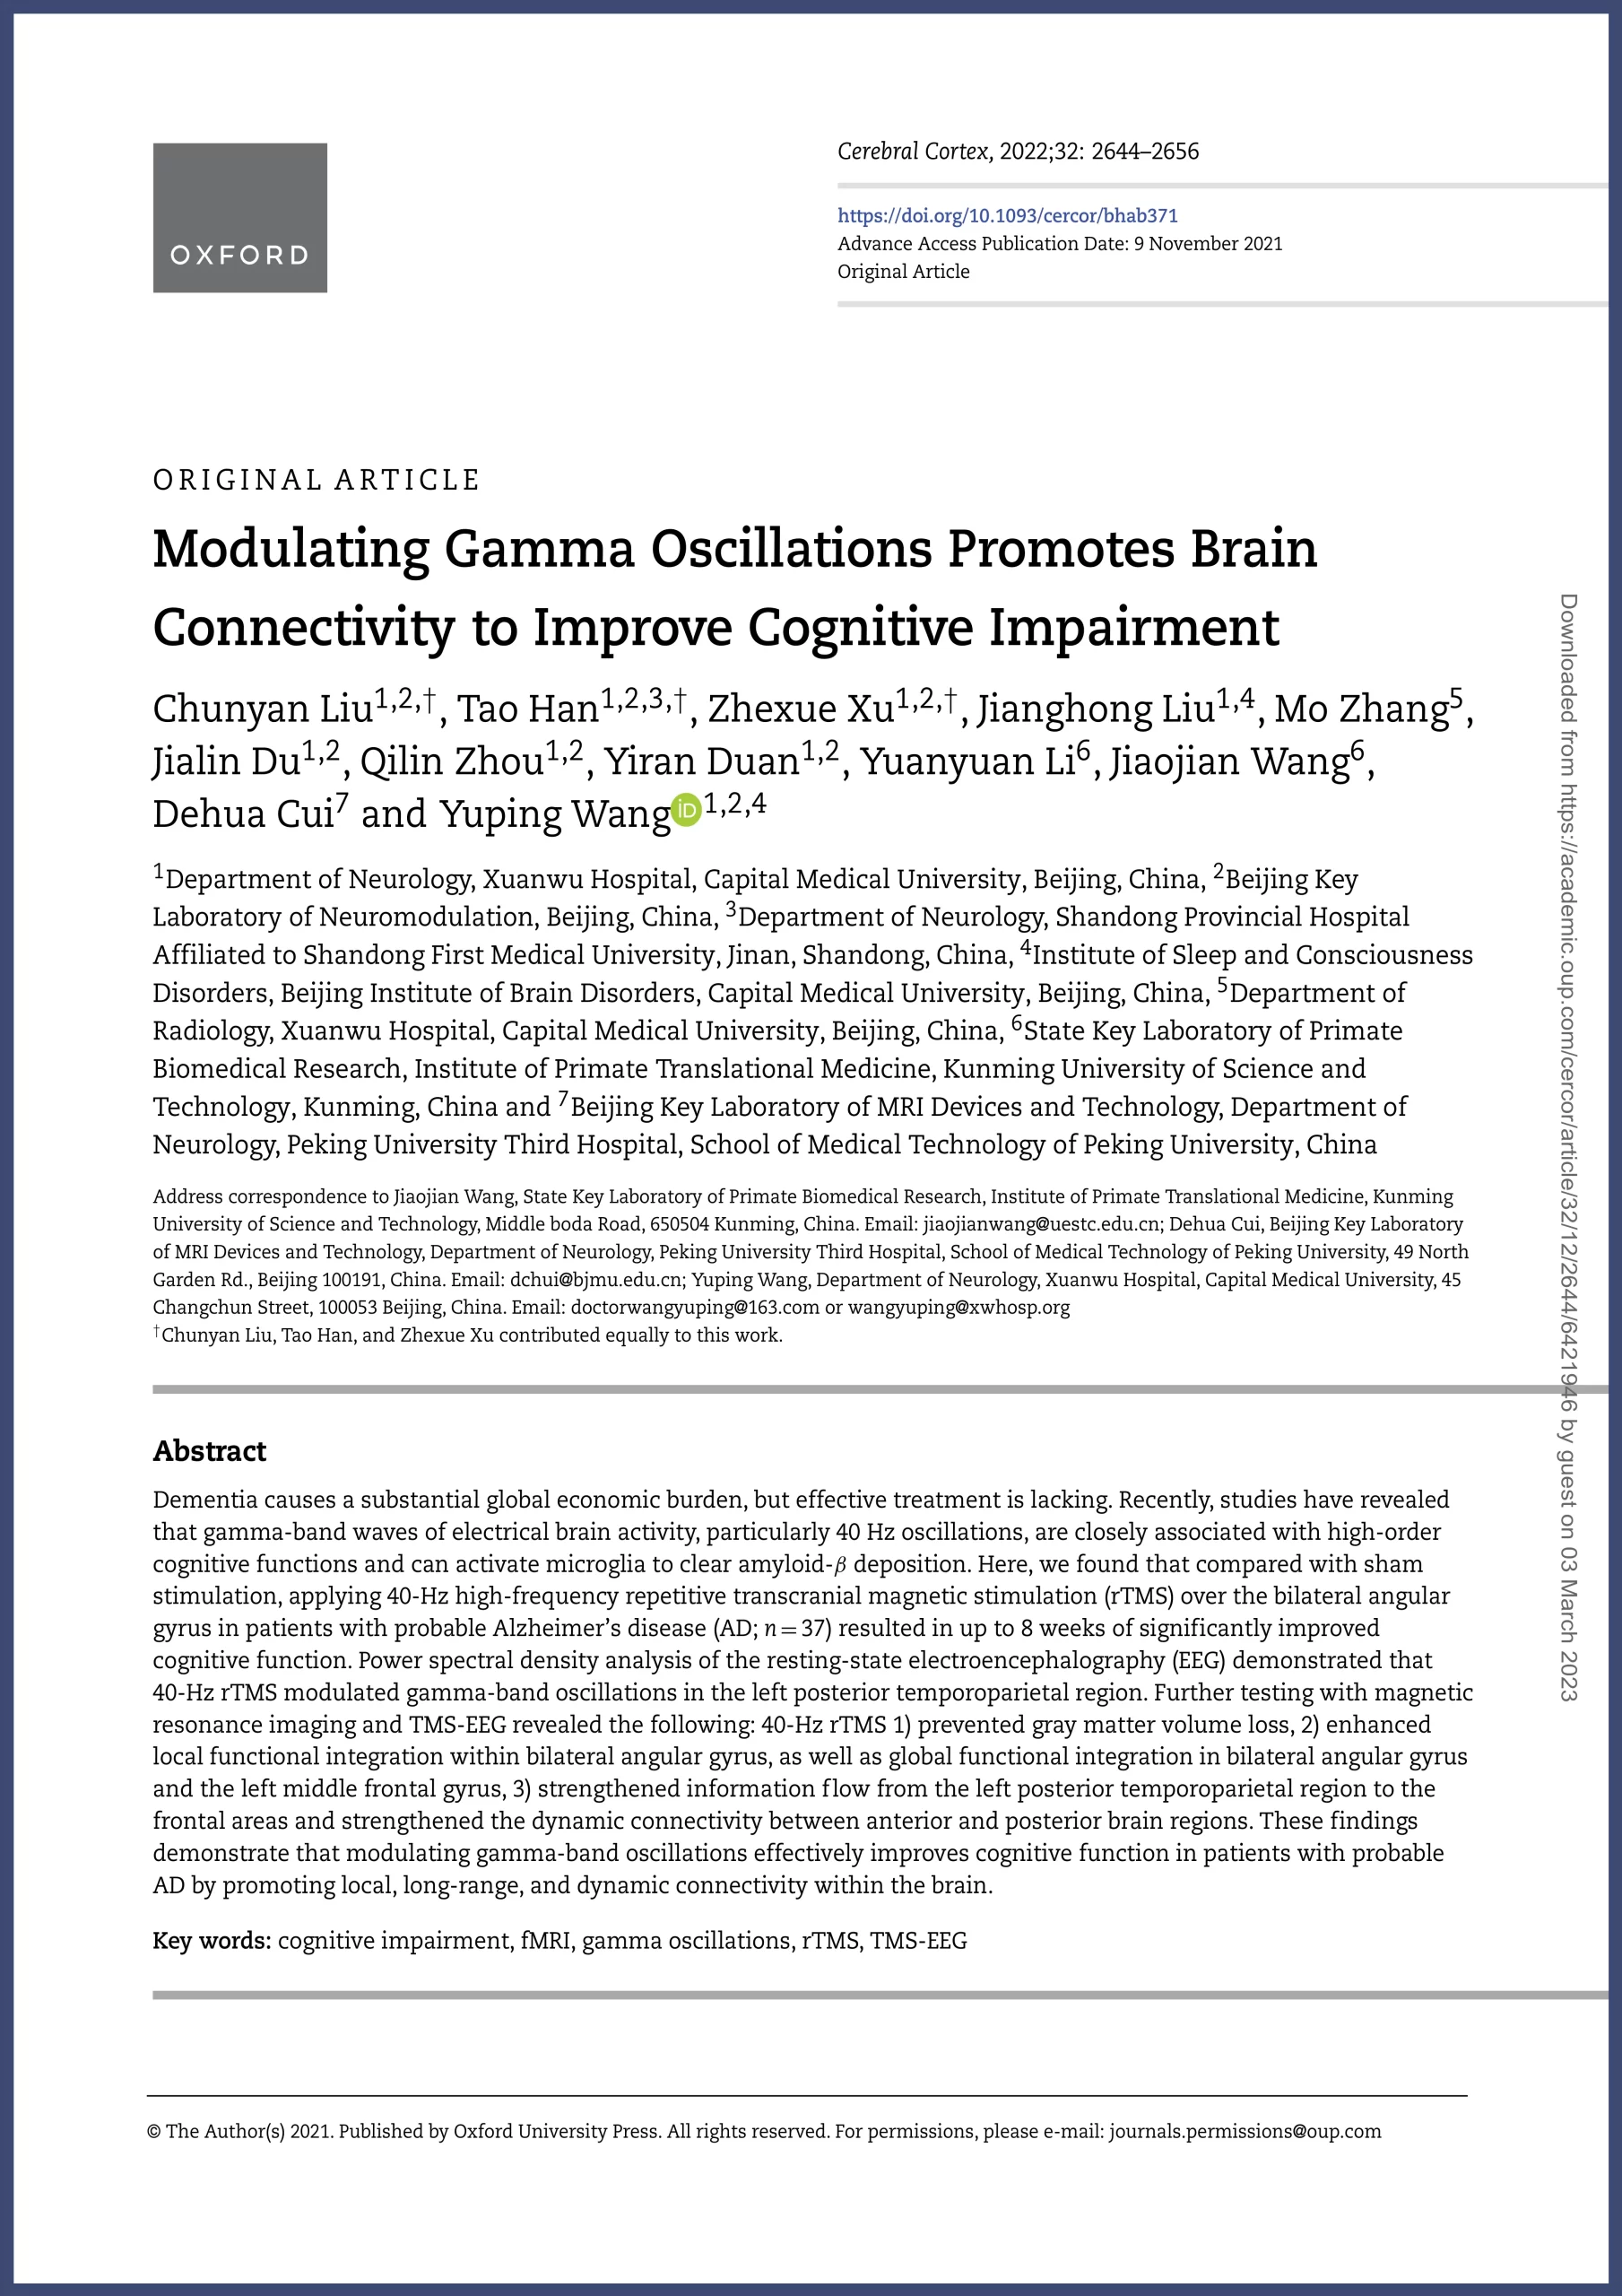 Modulating Gamma Oscillations Promotes Brain Connectivity to Improve Cognitive Impairment publication by Liu, 2022